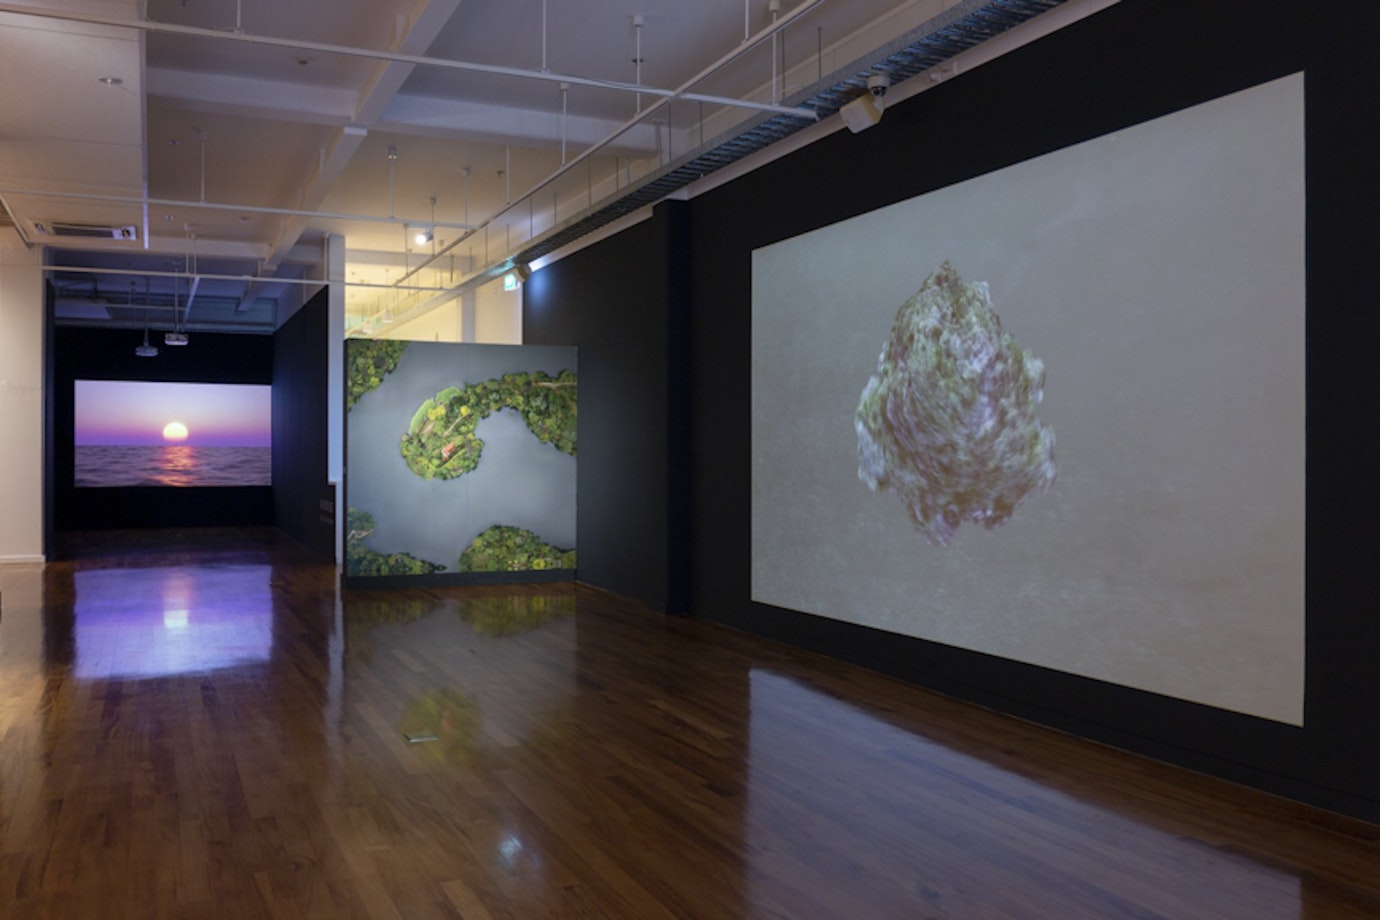 A gallery with several large scale projections of natural forms with subtle transformations in their natural form, including a setting sun in purple, an island and a ball of organic matter ,